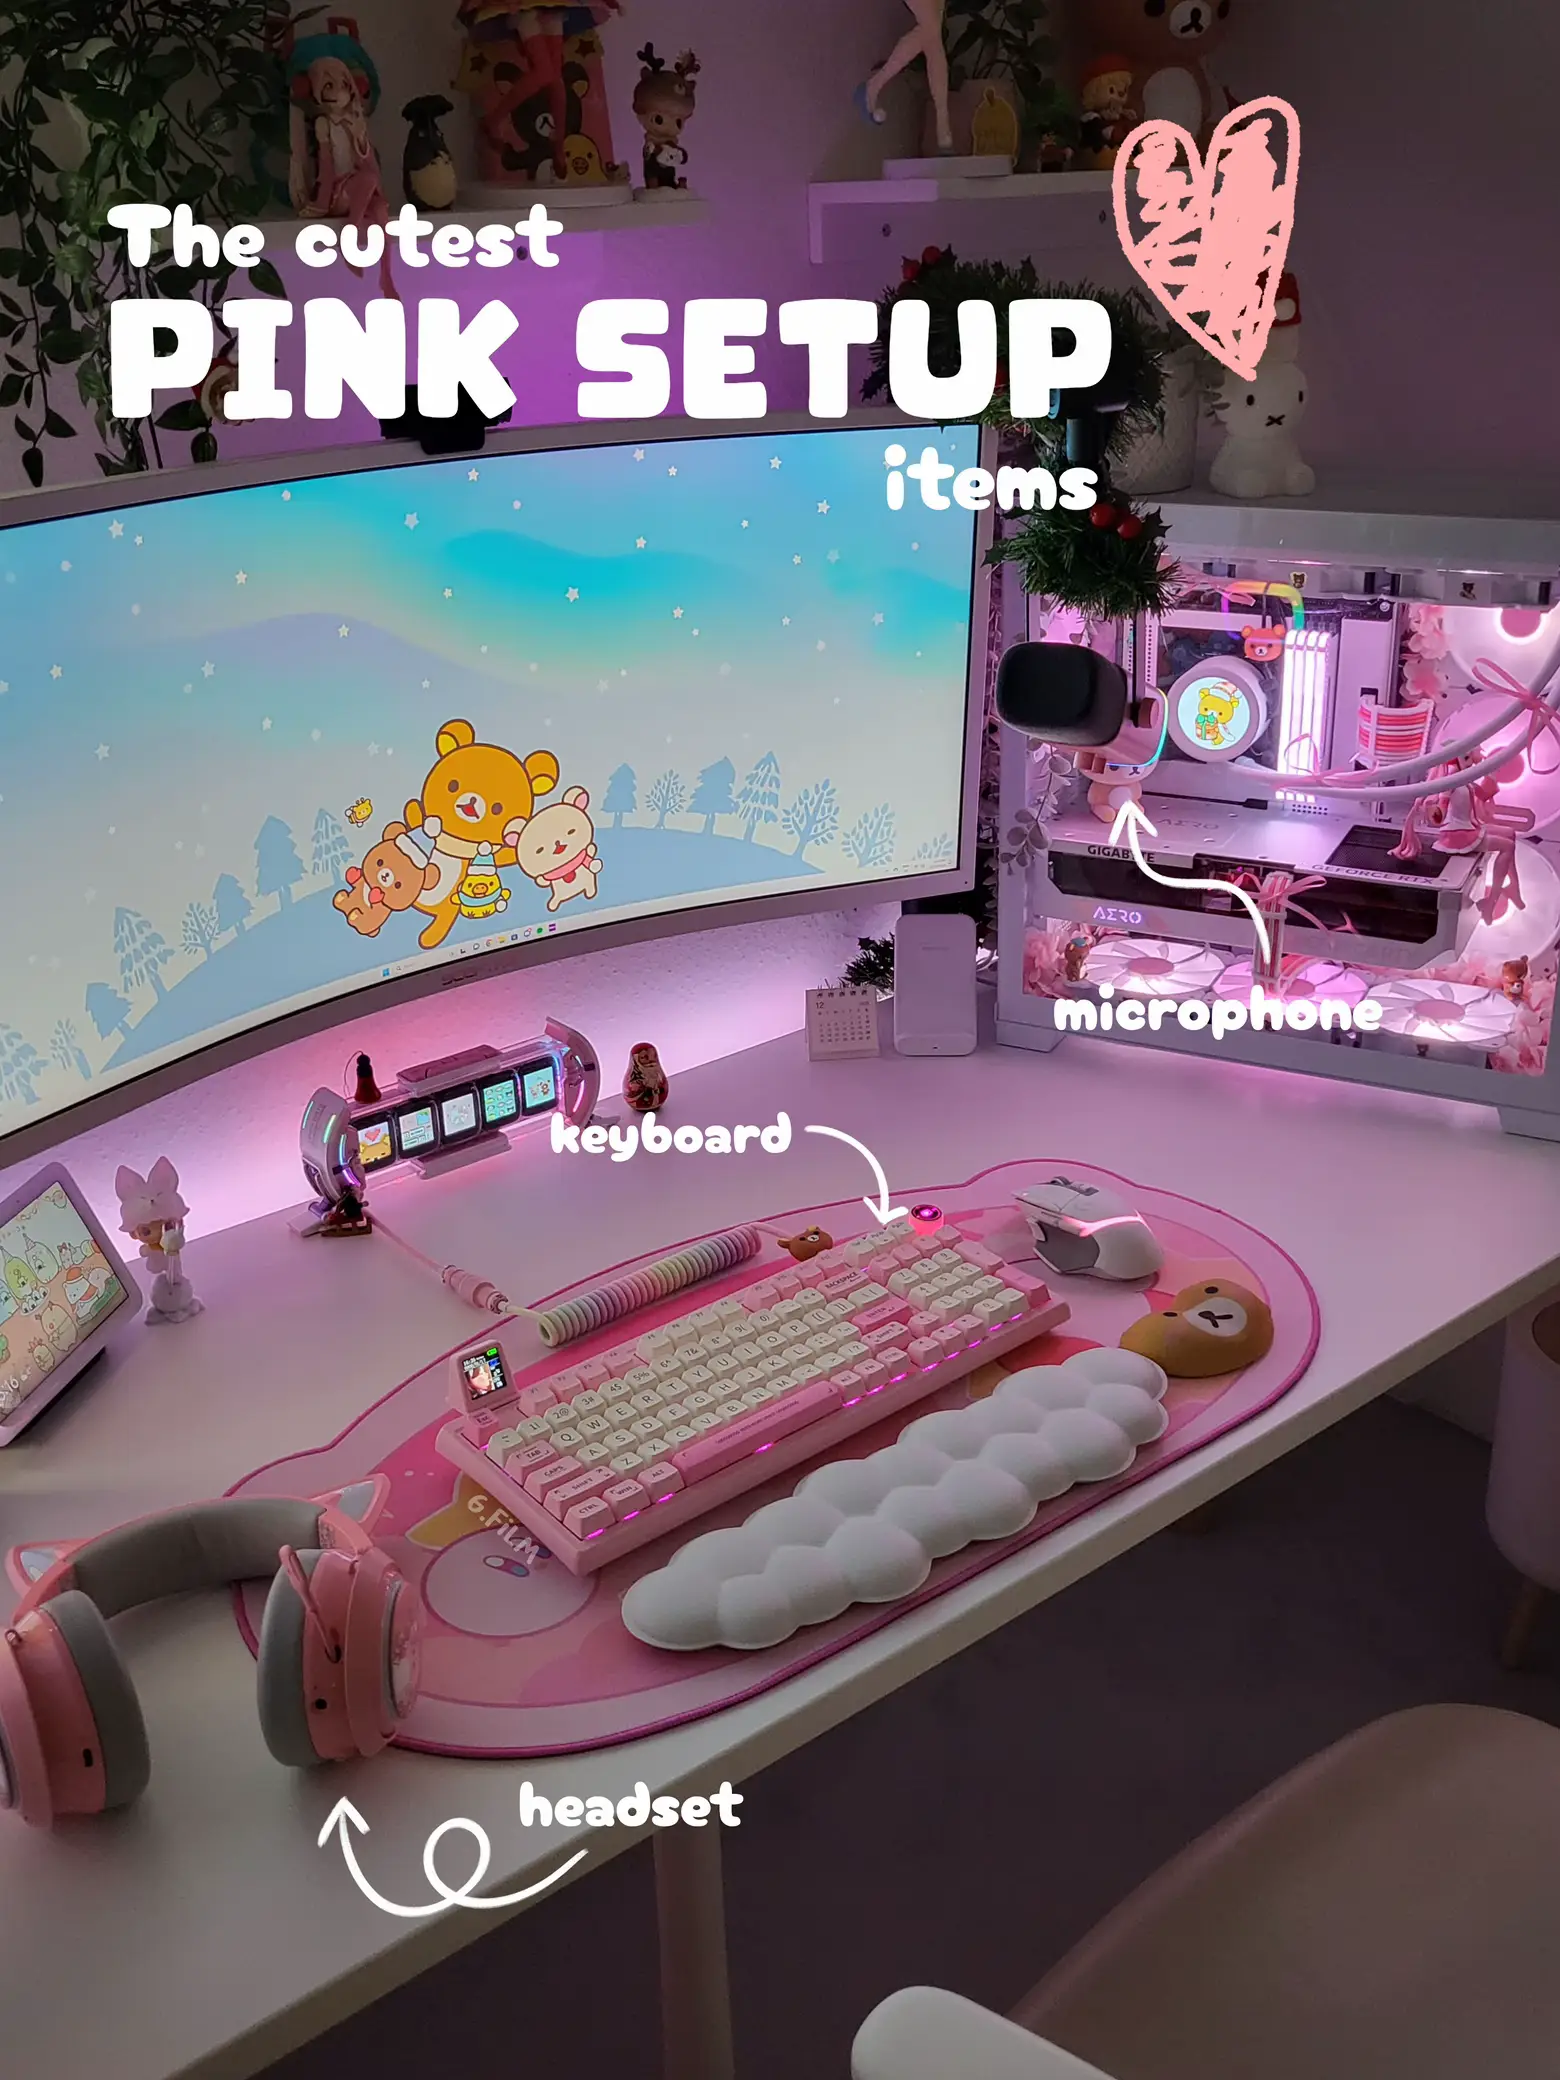 Pink girl back again with more pink stuff. : r/GirlGamers